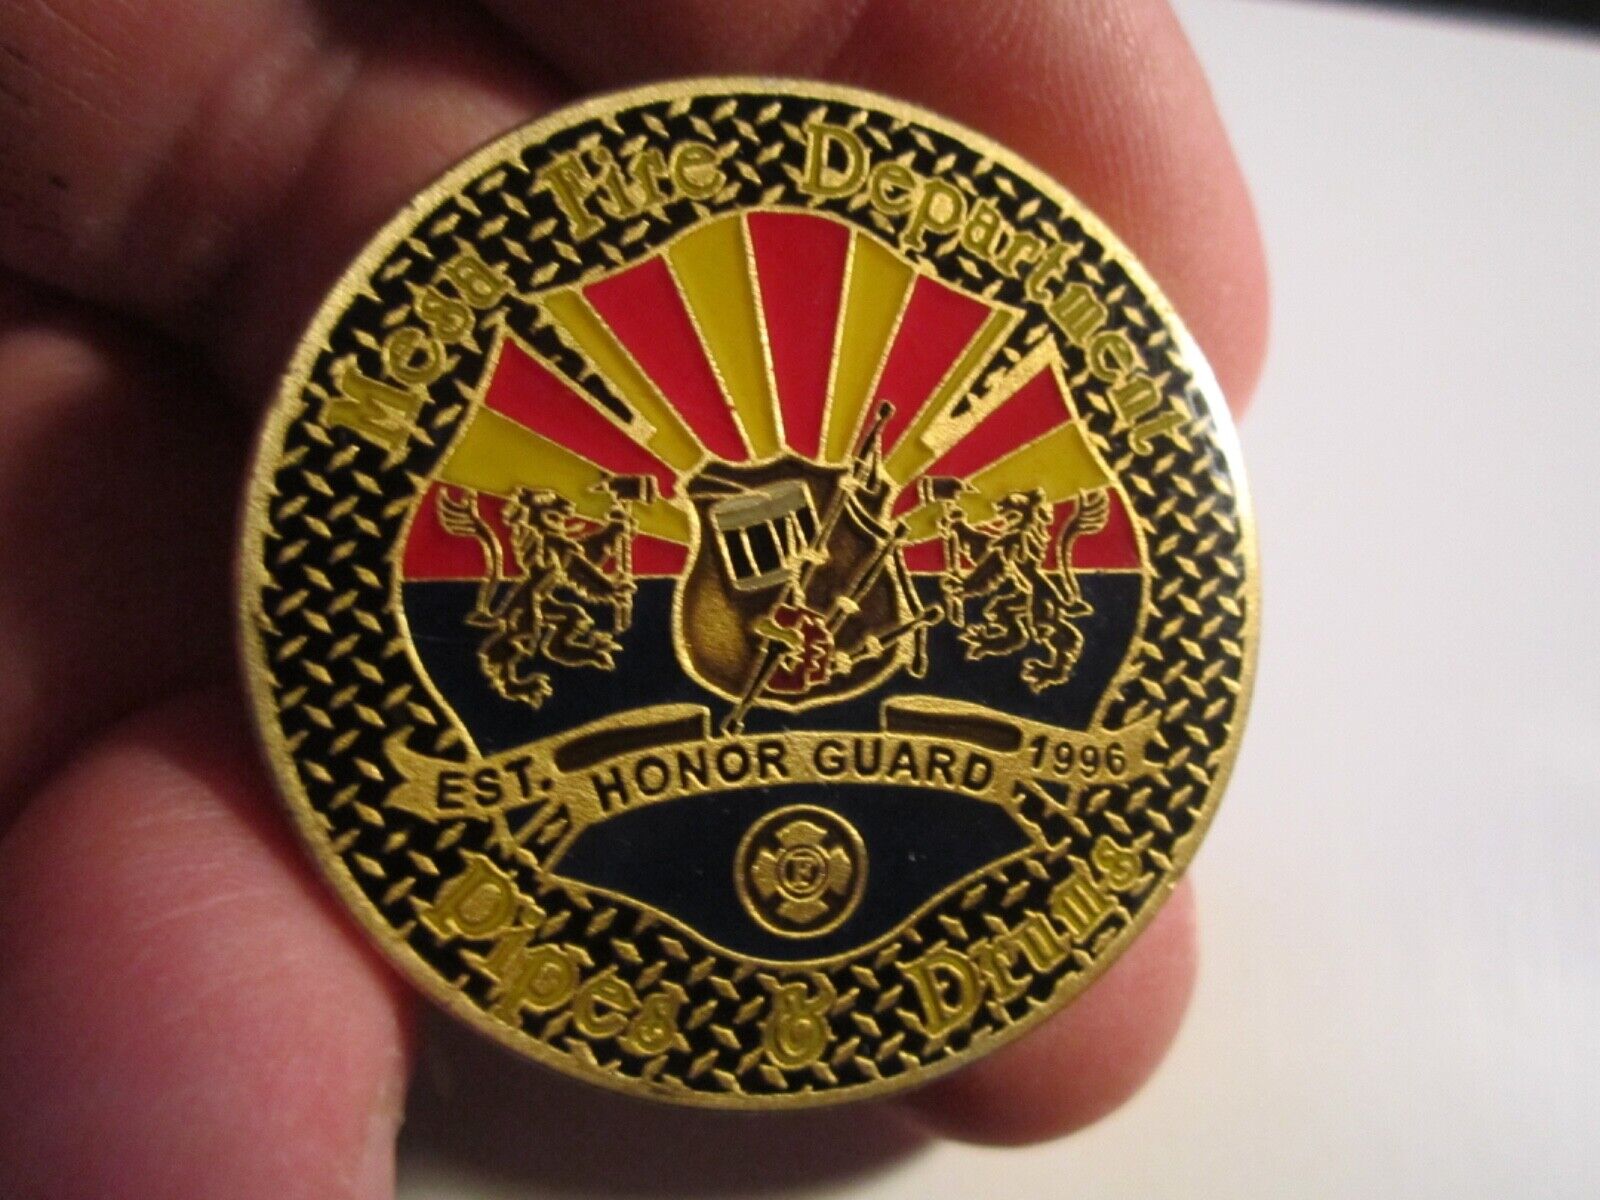 1996 PIPES AND DRUMS HONOR GUARD CHALLENGE COIN - BBA-23D